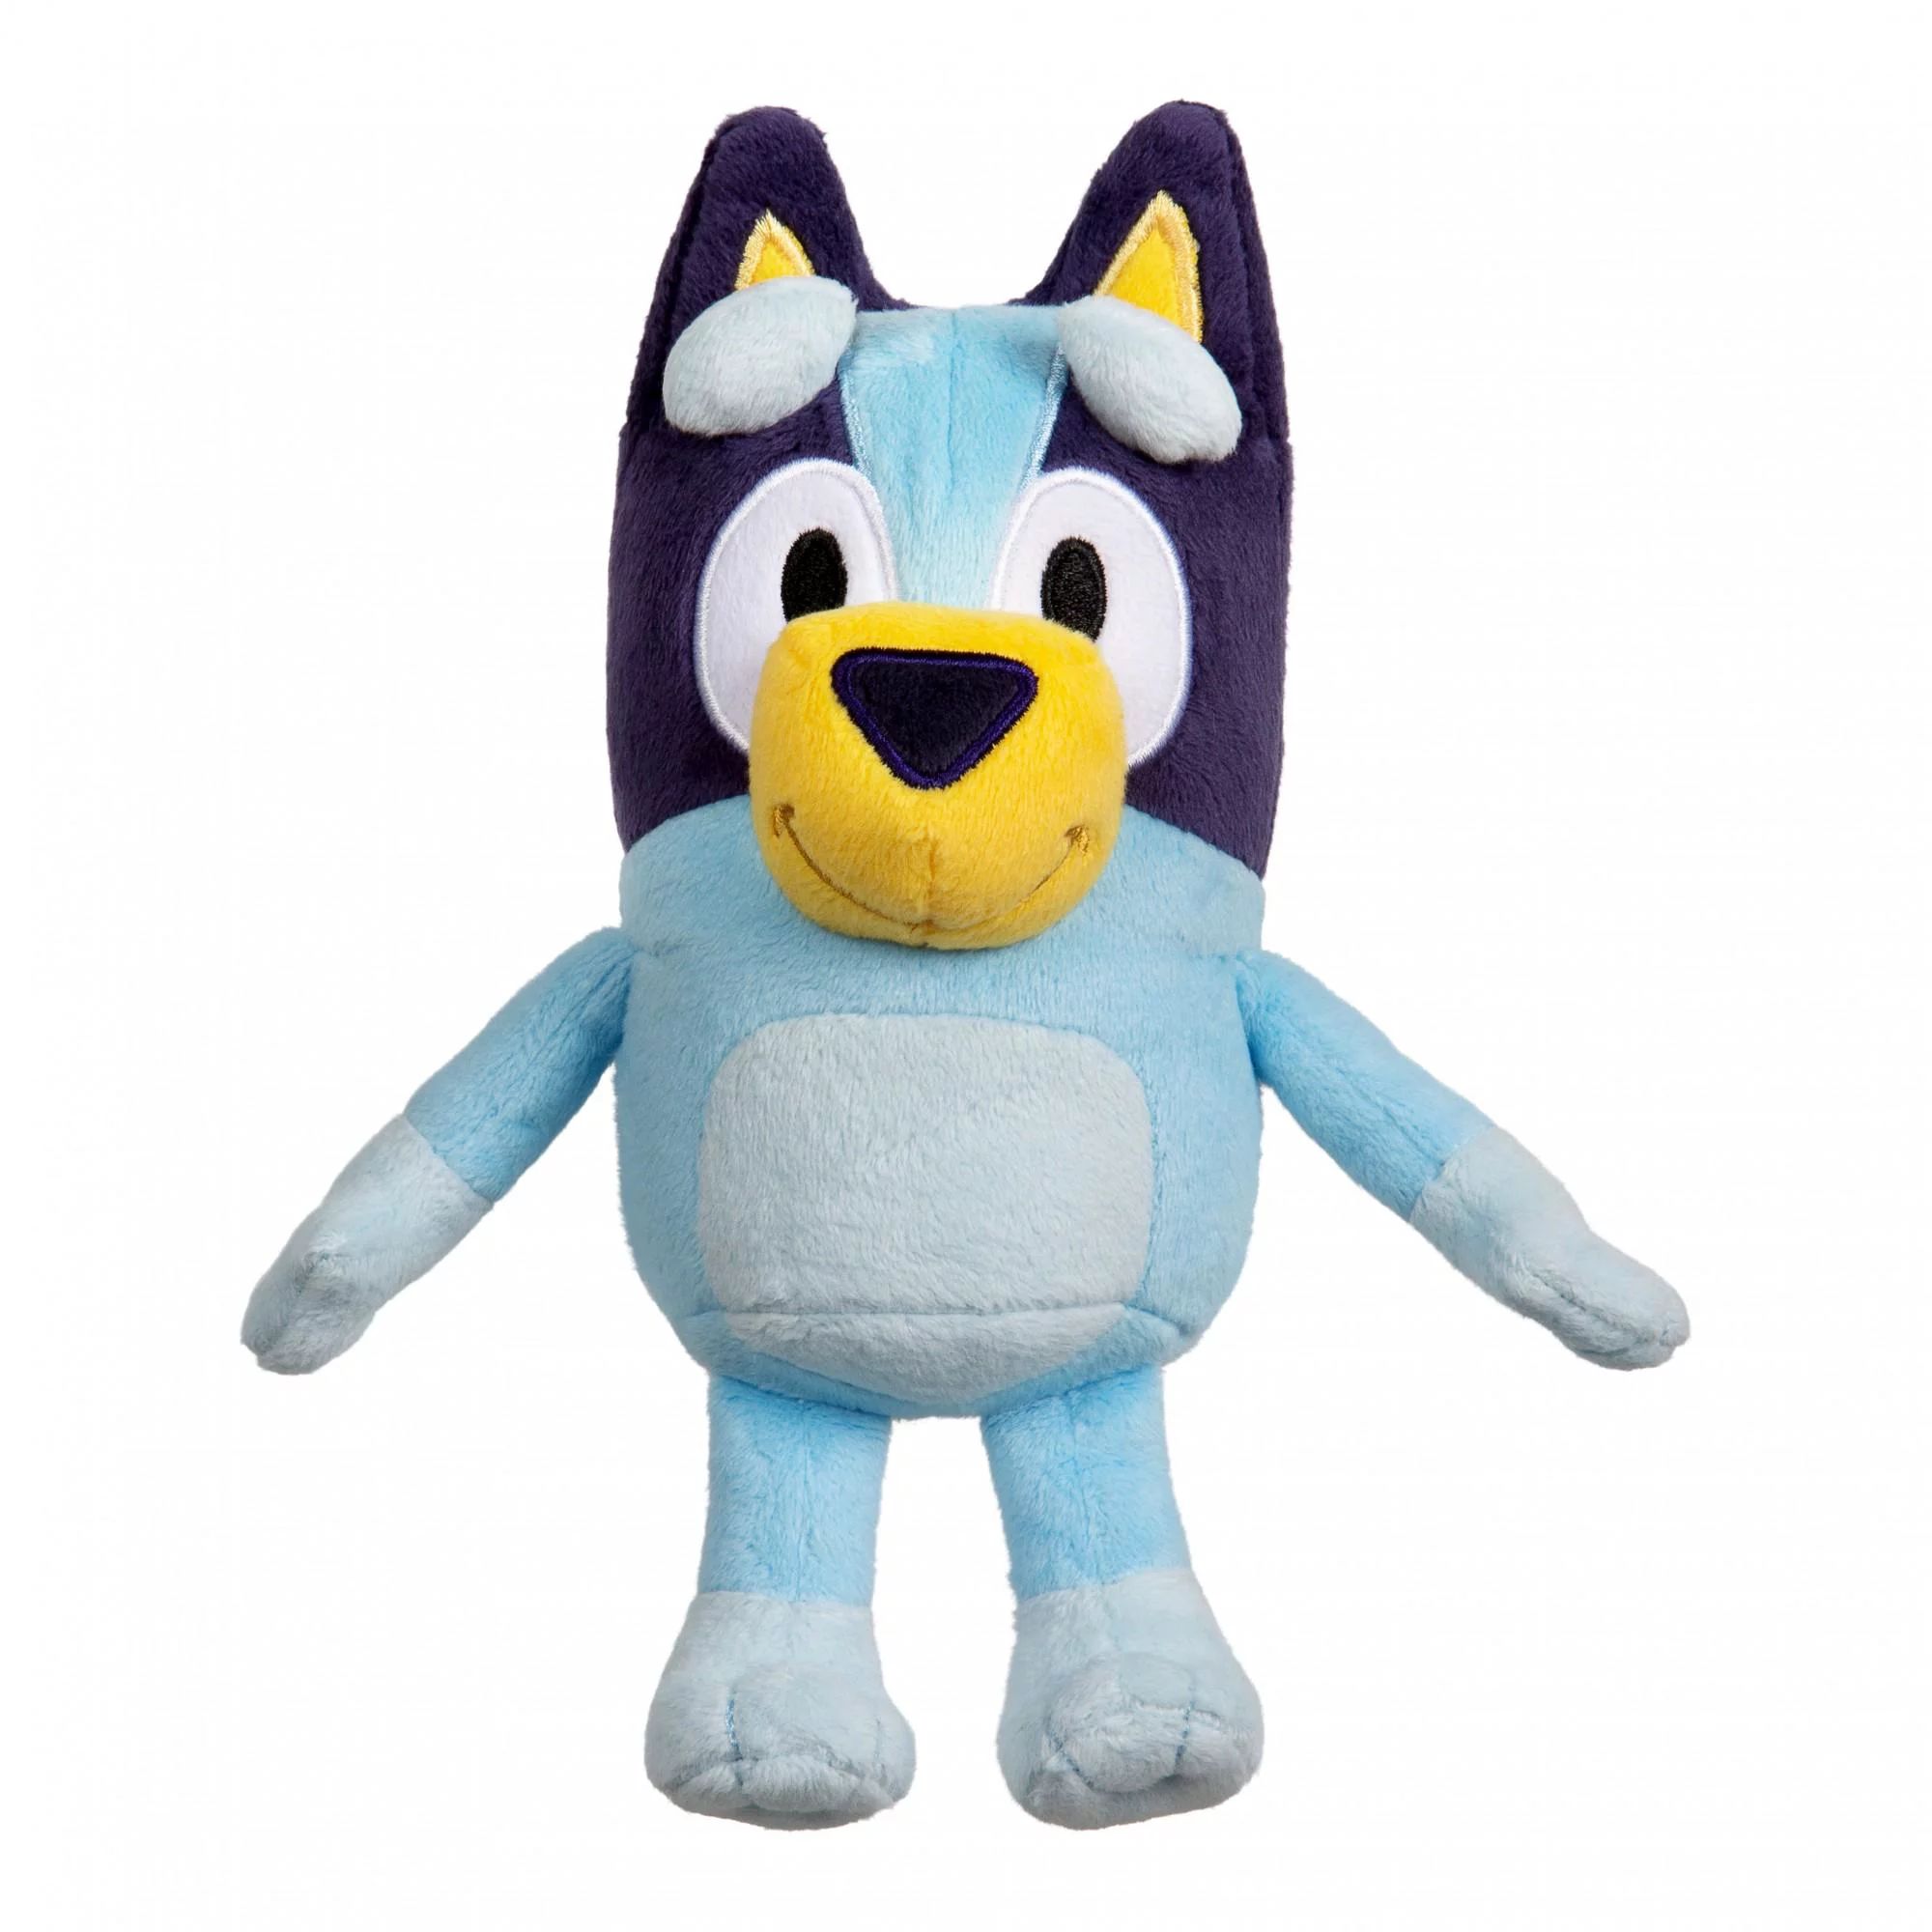 Bluey Friends 8" Tall Plush - Soft and Cuddly - Styles May Vary | Walmart (US)